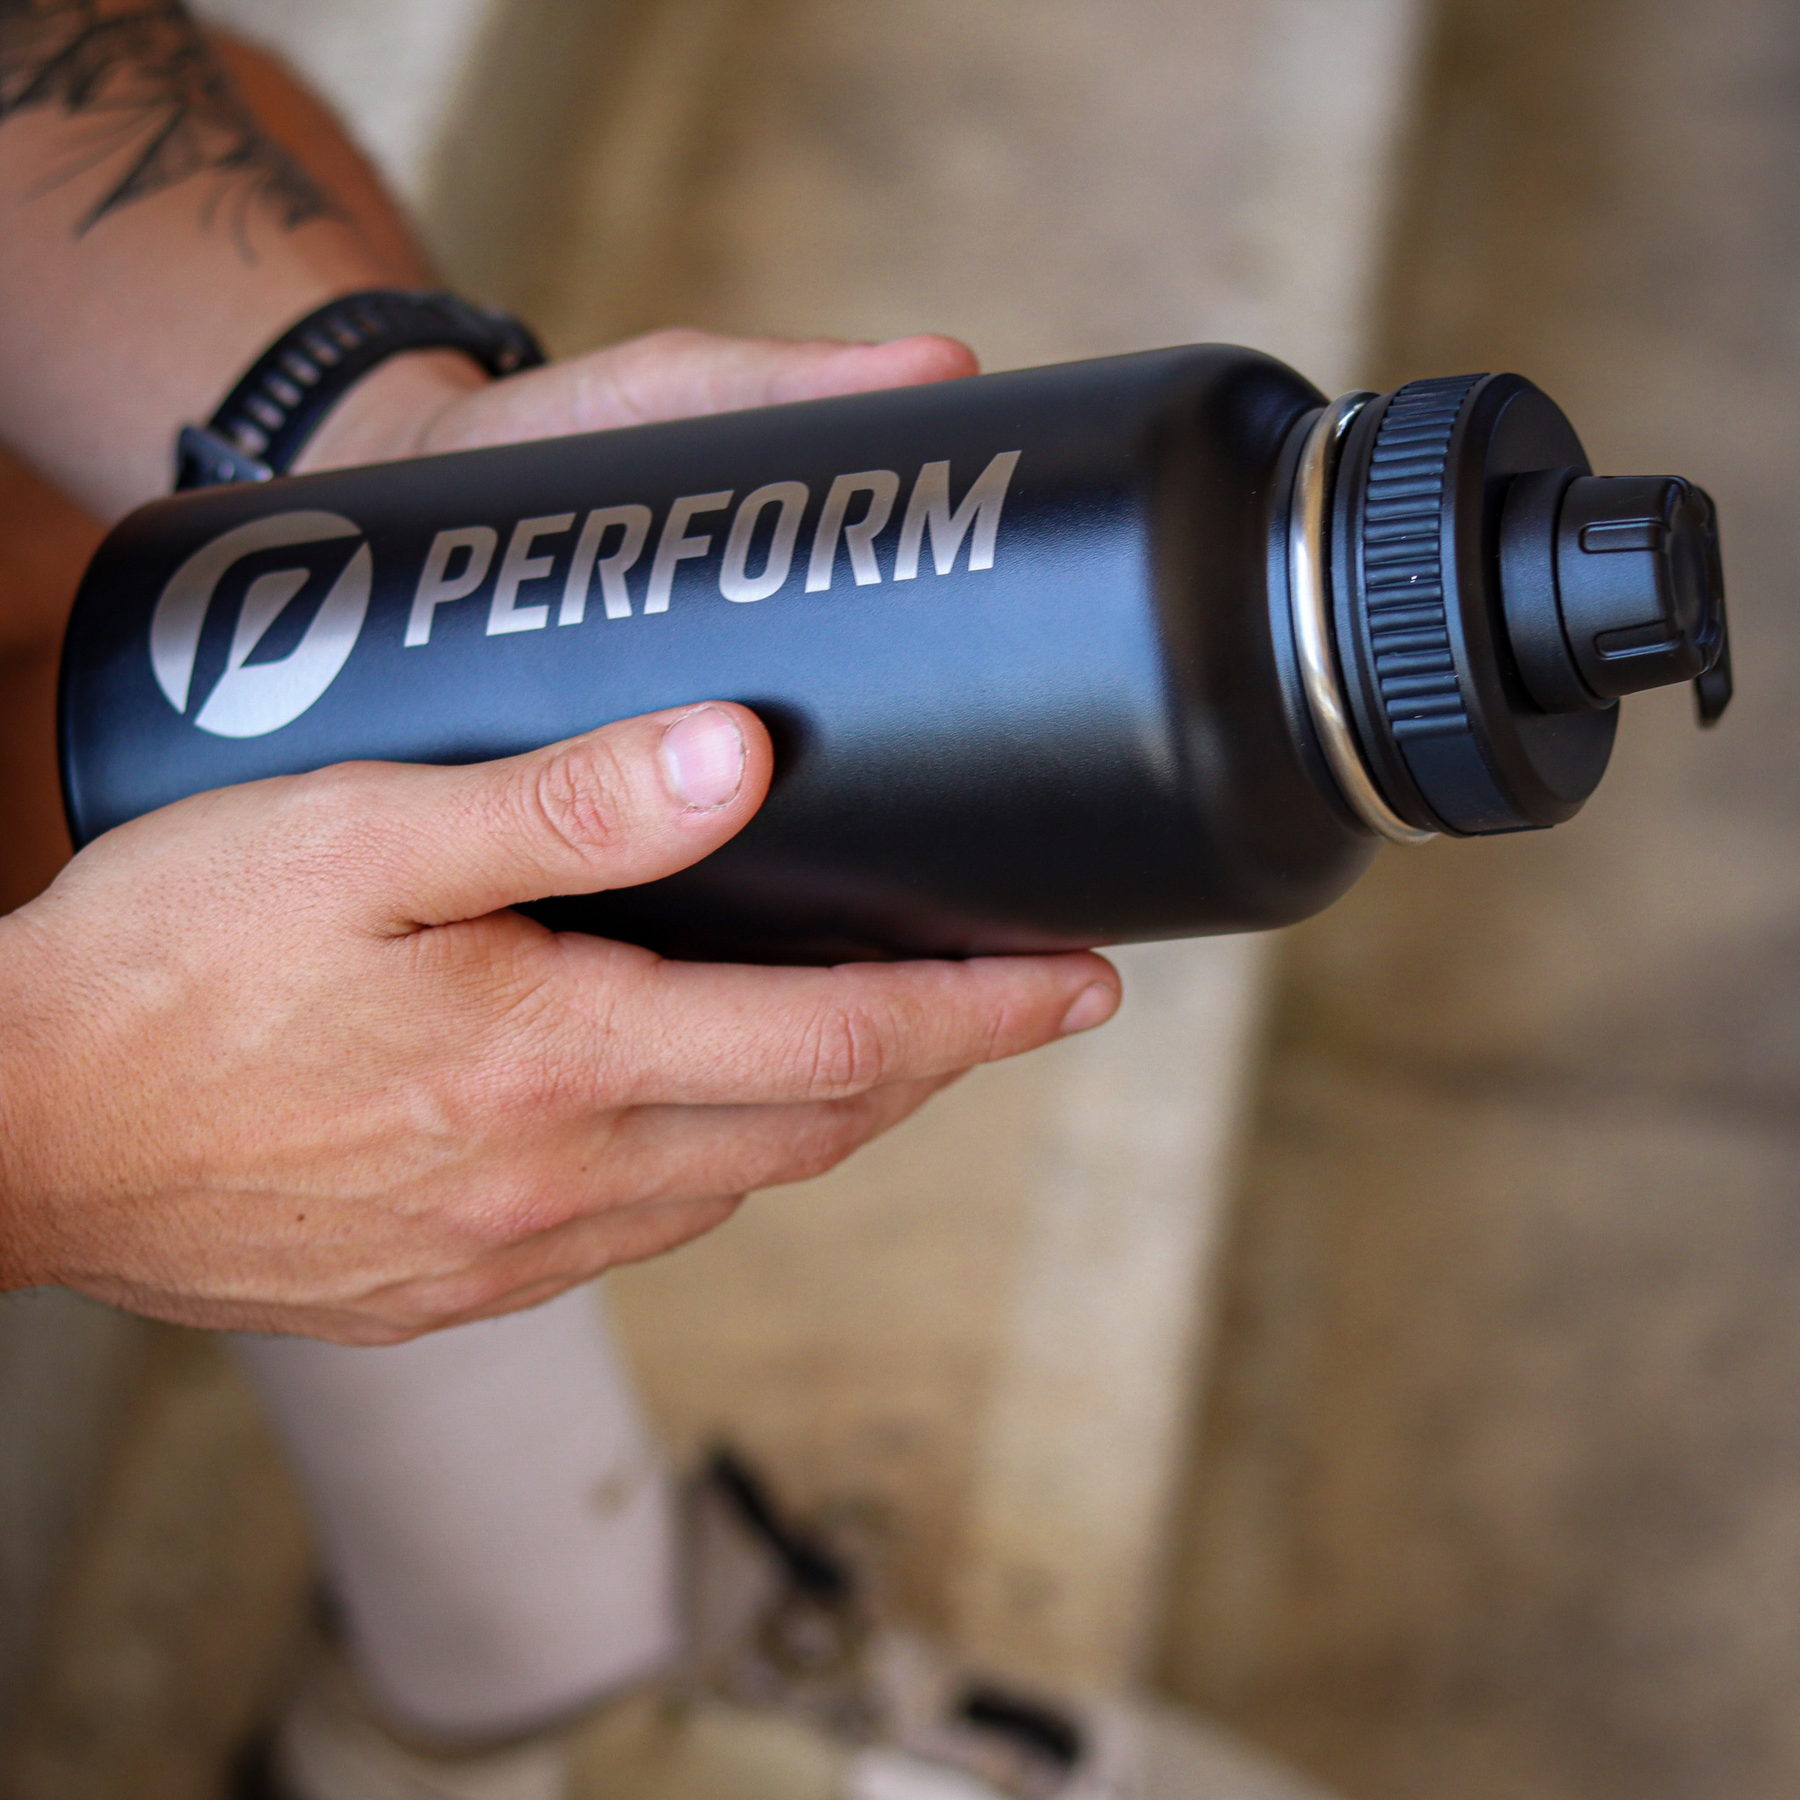 INSULATED SPORT WATER BOTTLE – Perform Athletics